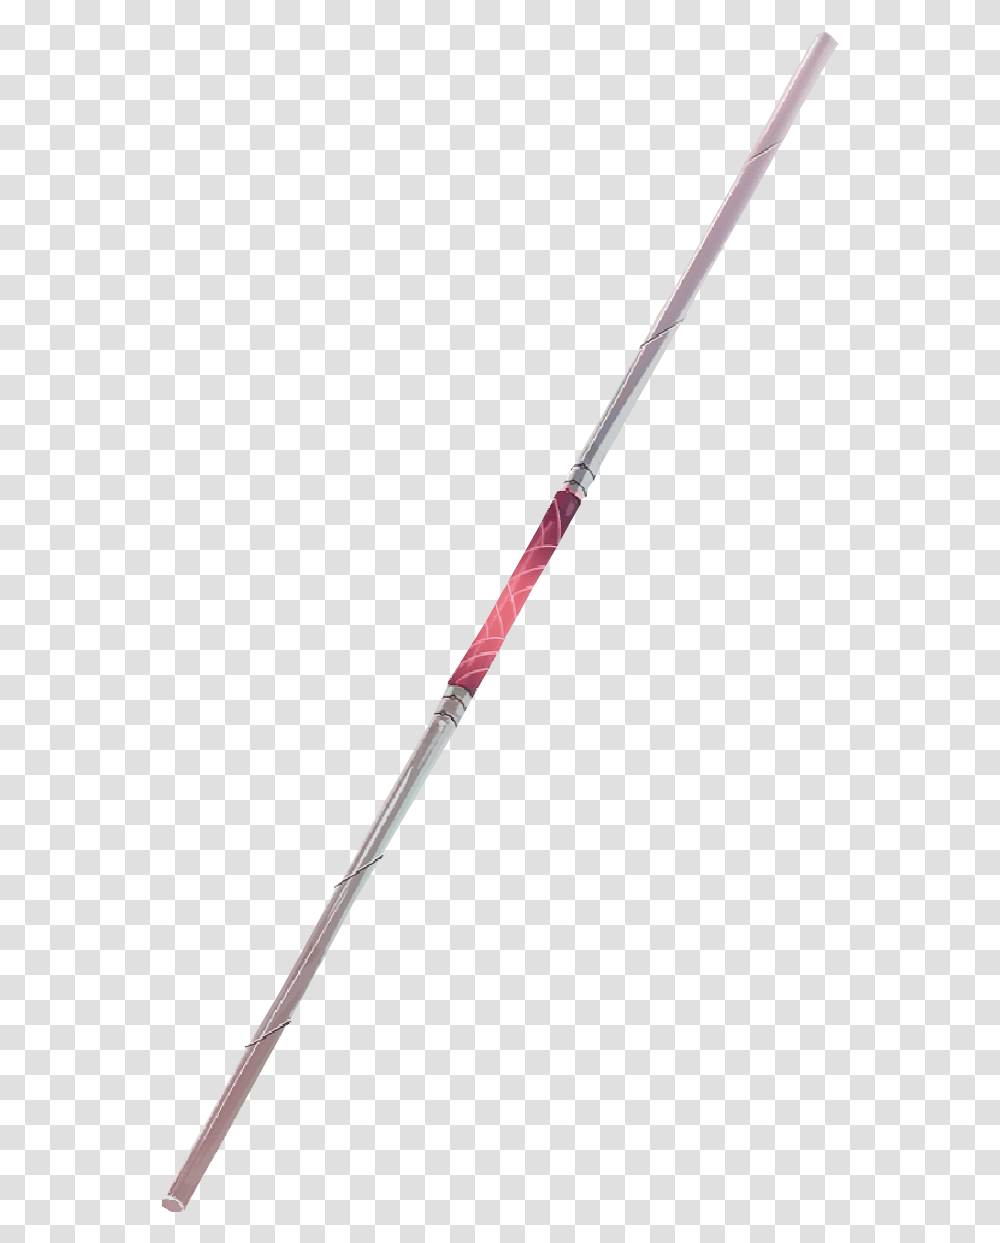 Bo Staff Fishing Rod, Weapon, Weaponry, Spear Transparent Png